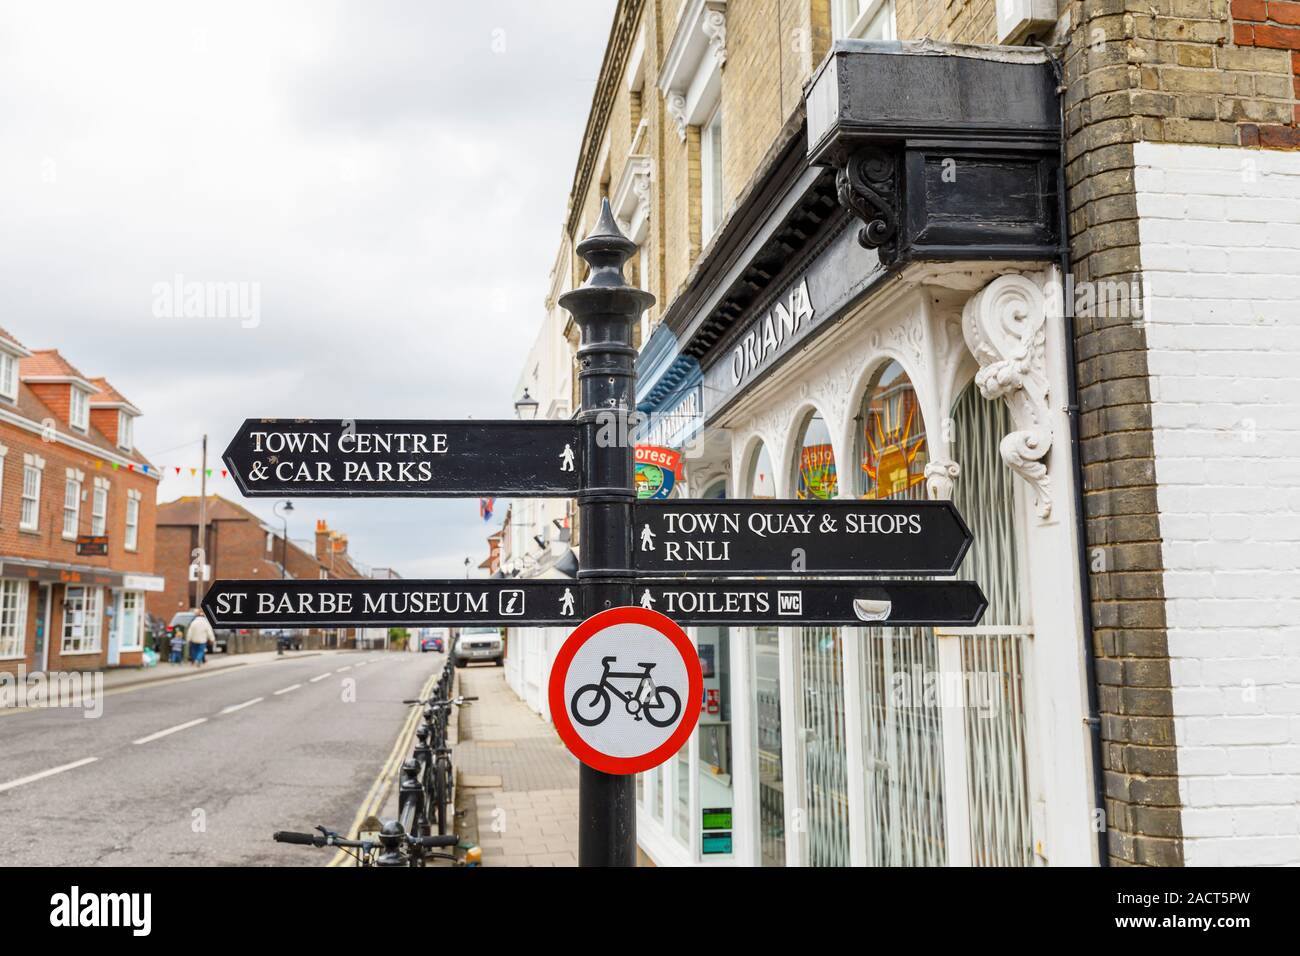 Signpost pointing to local amenities and attractions in Lymington, New Forest district of Hampshire, southern England, UK Stock Photo